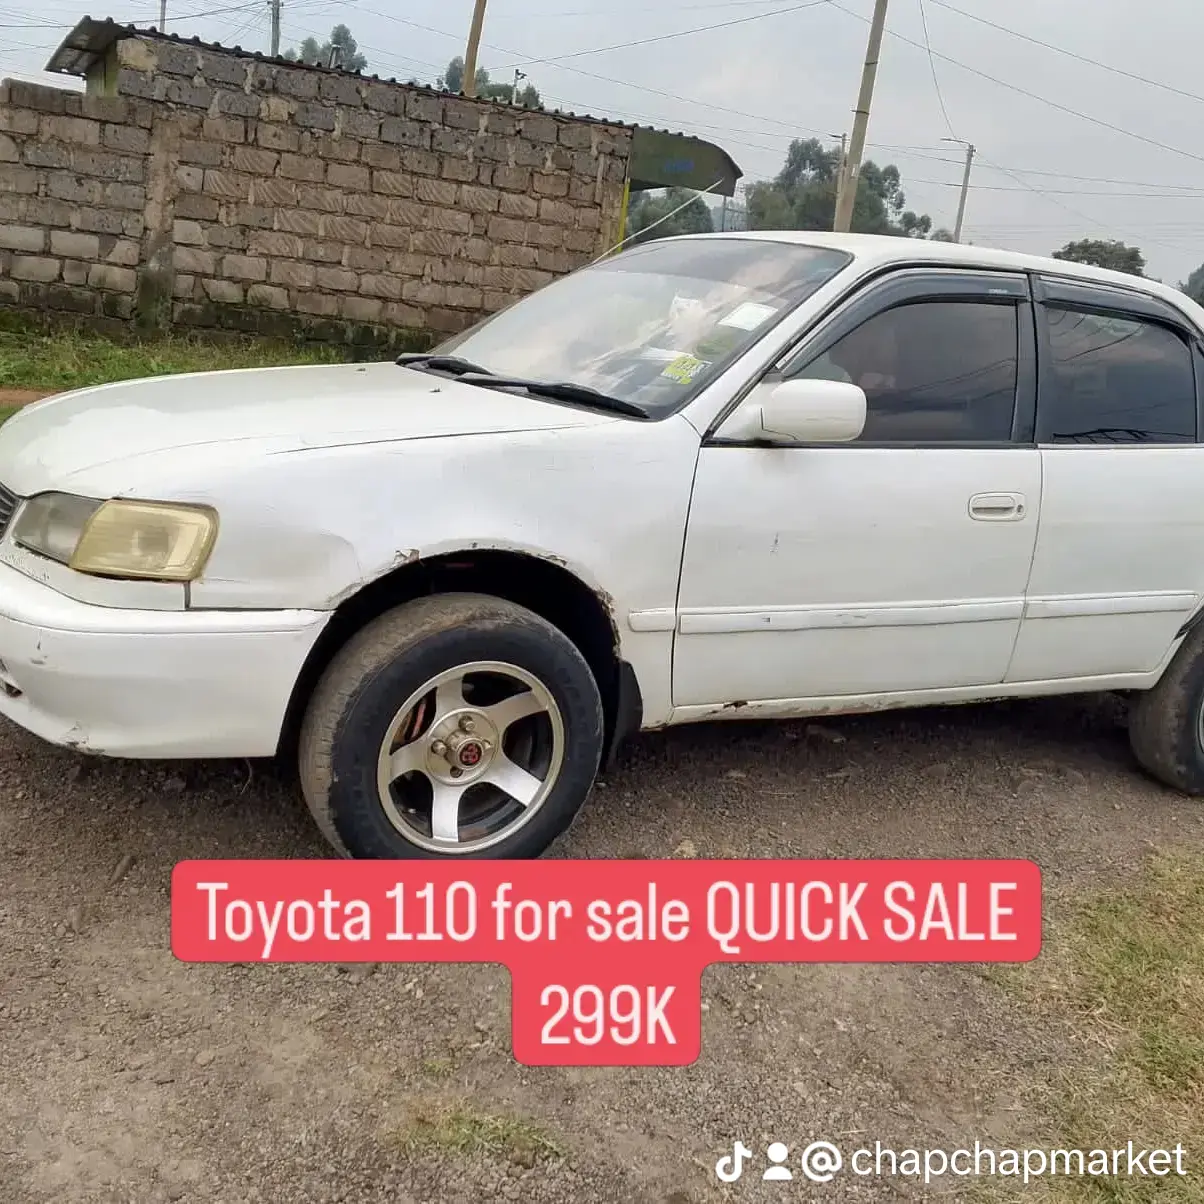 TOYOTA 110 QUICK SALE You Pay 30% Deposit Trade in OK! Hire purchase installments automatic